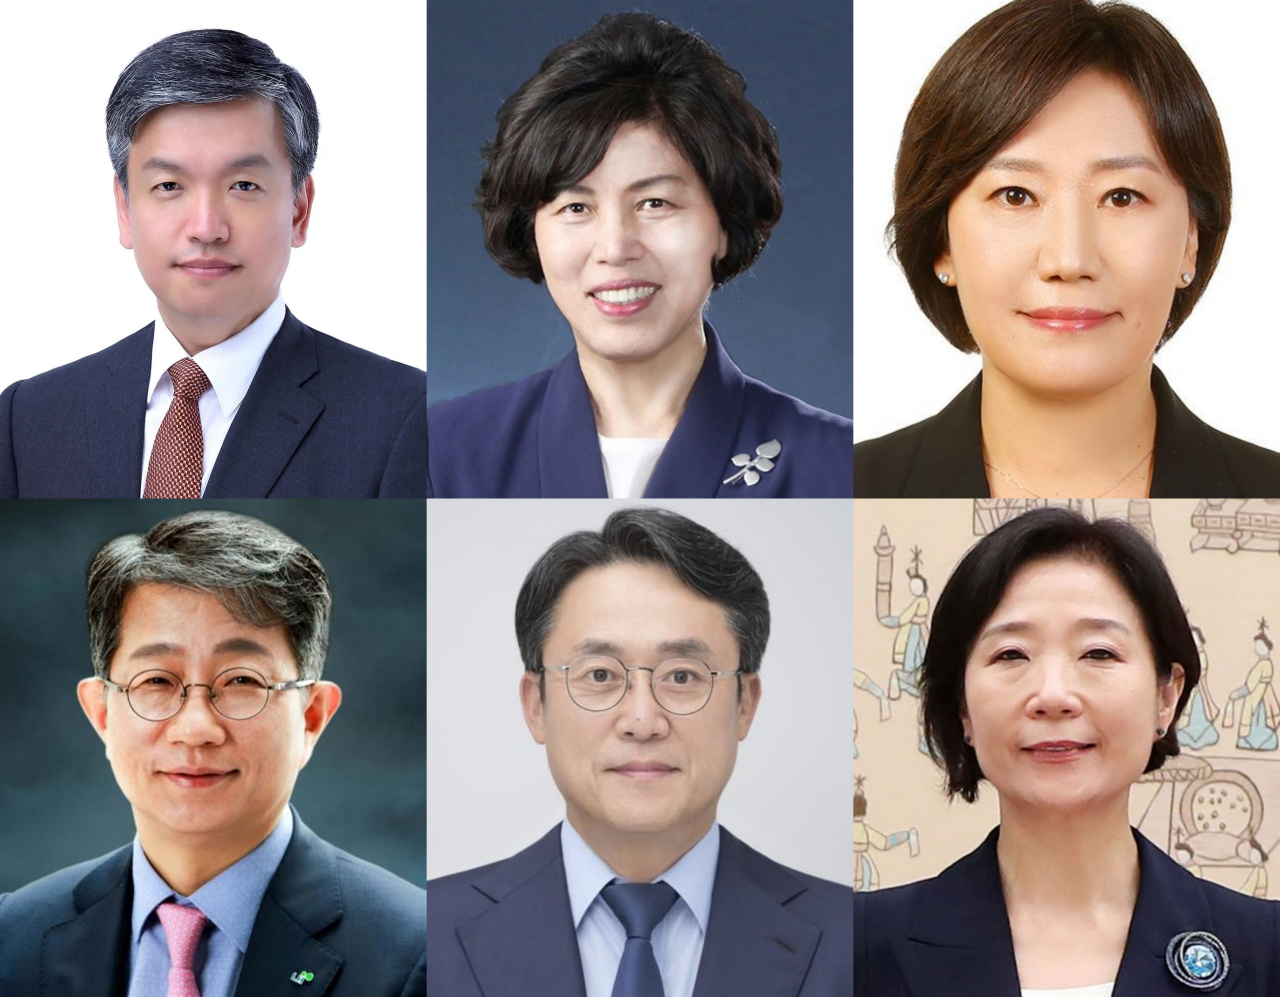 From top left, clockwise: Finance Minister nominee Choi Sang-mok, Veterans Minister nominee Kang Jung-ai, Agriculture Minister nominee Song Mi-ryung, Startups and SMEs Minister nominee Oh Young-ju, Oceans Minister nominee Kang Do-hyung and Land Minister nominee Park Sang-woo. (Presidential office)